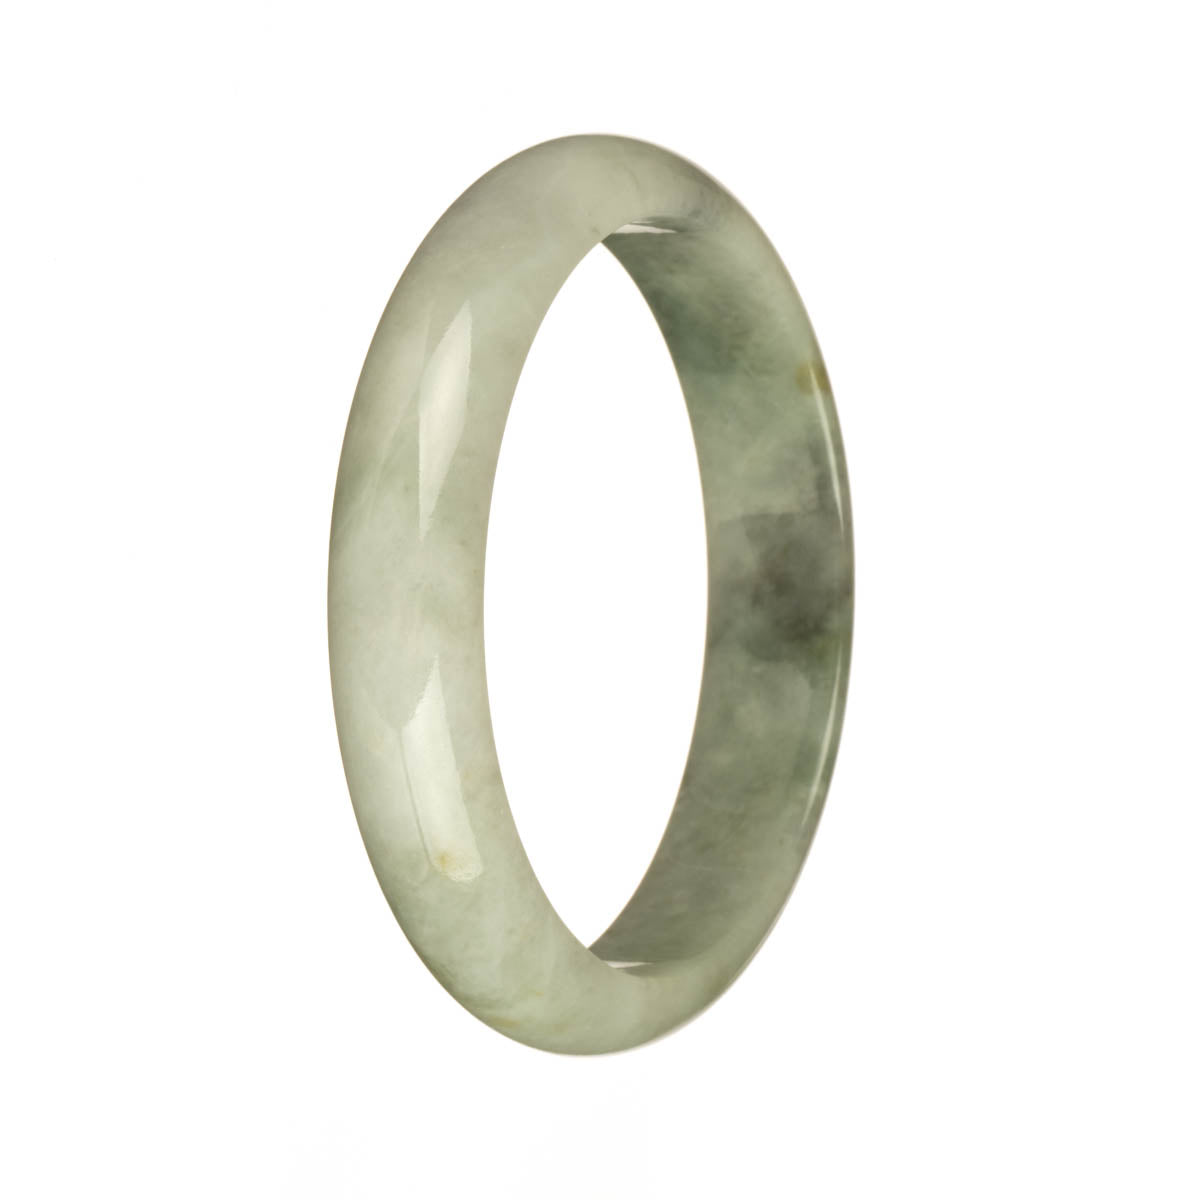 A beautiful half-moon shaped Burma jade bangle bracelet with natural white and light grey tones, adorned with intricate brown and green patterns.